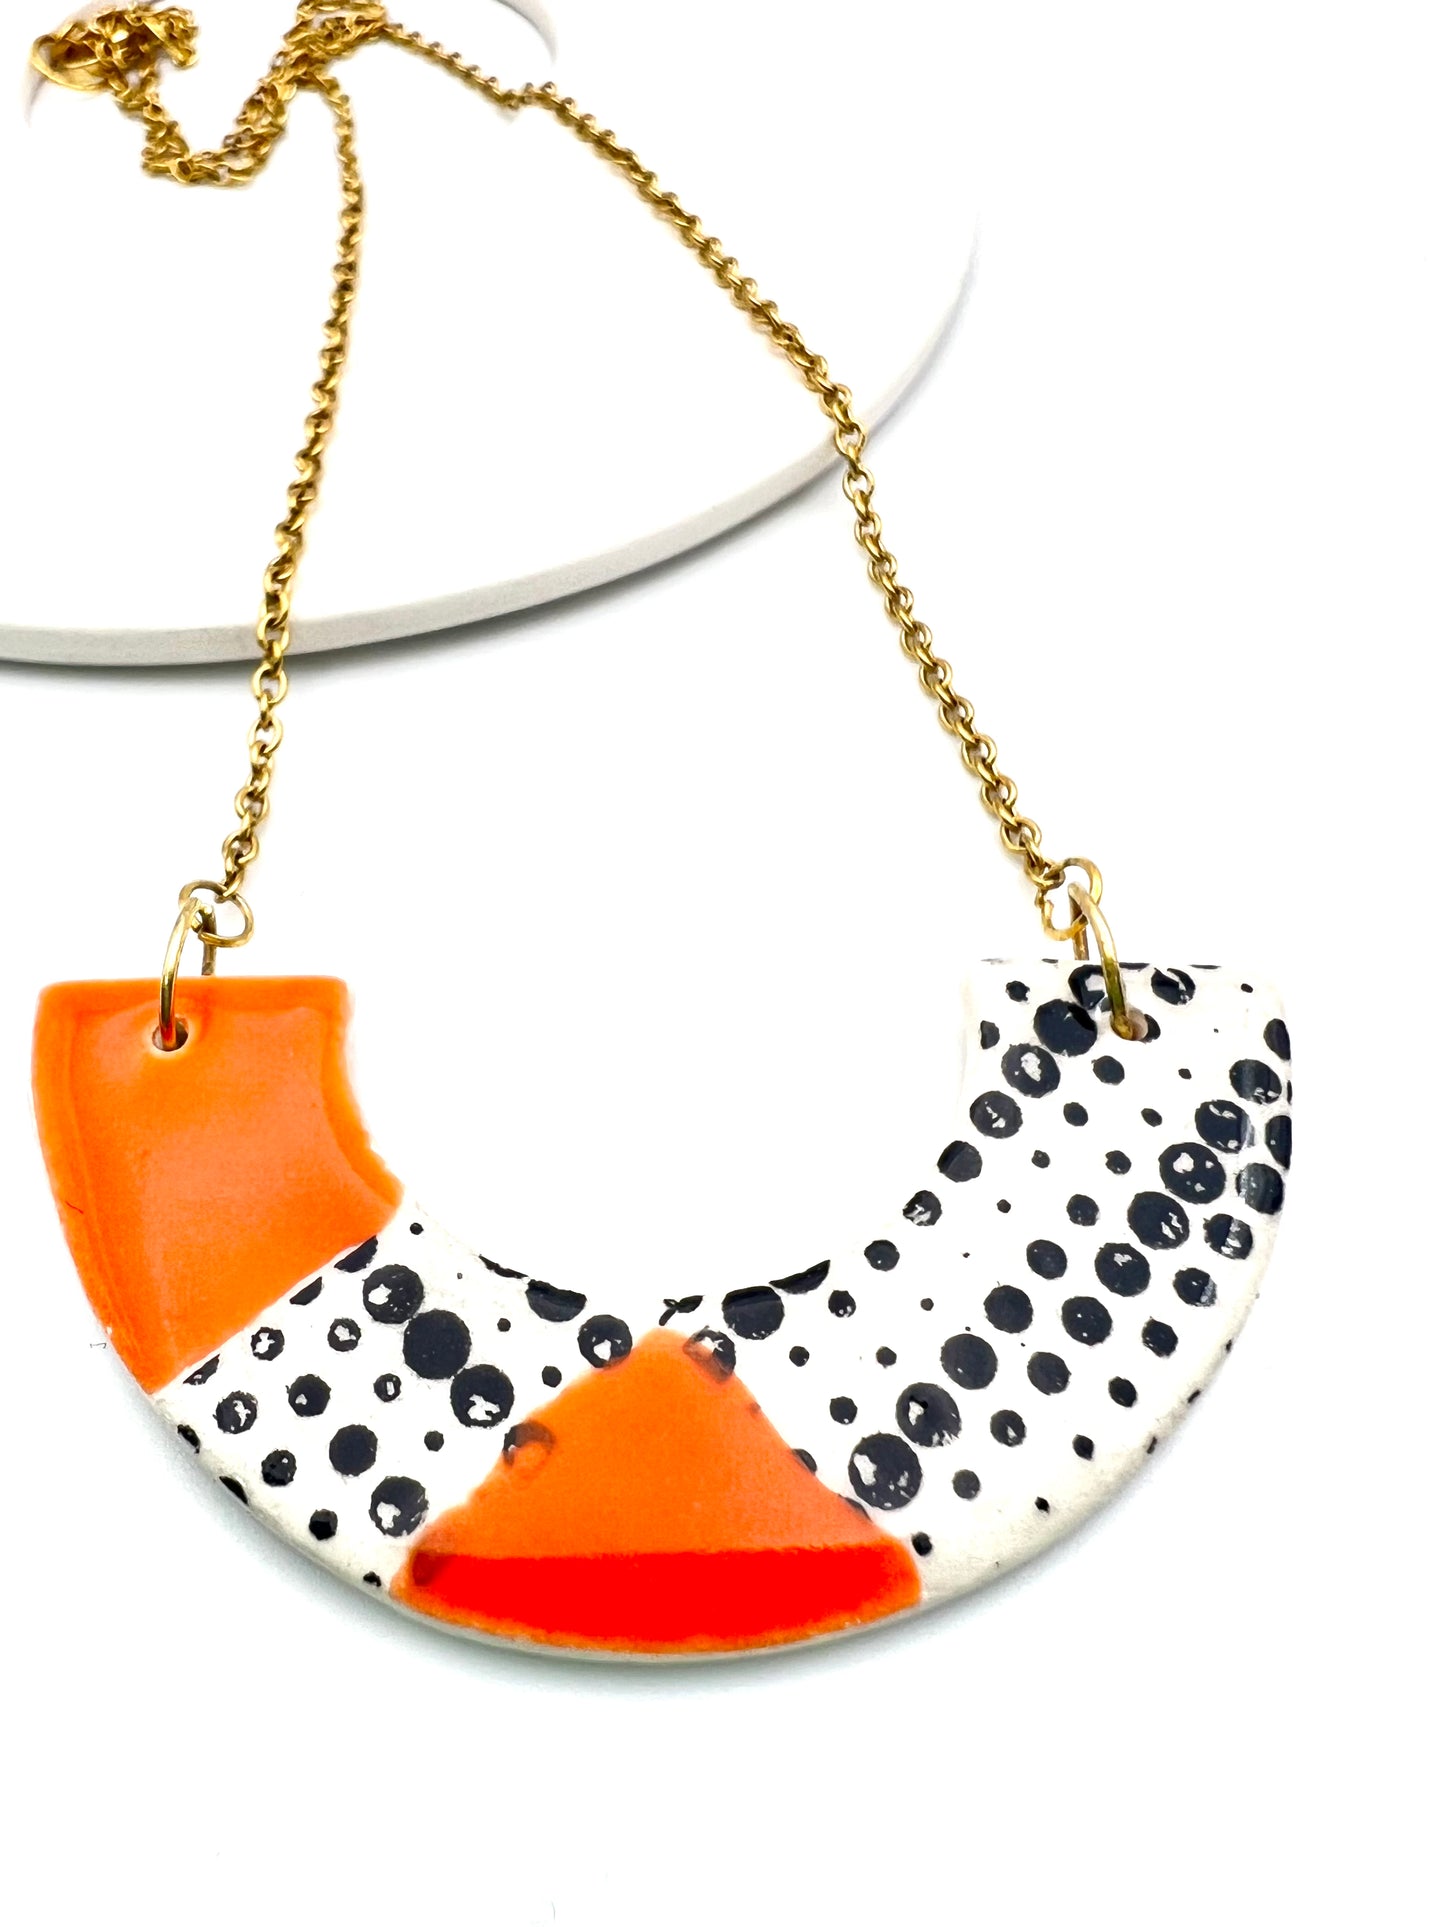 Ceramic Arc Necklace - Fire Opal & Black Dotted Print